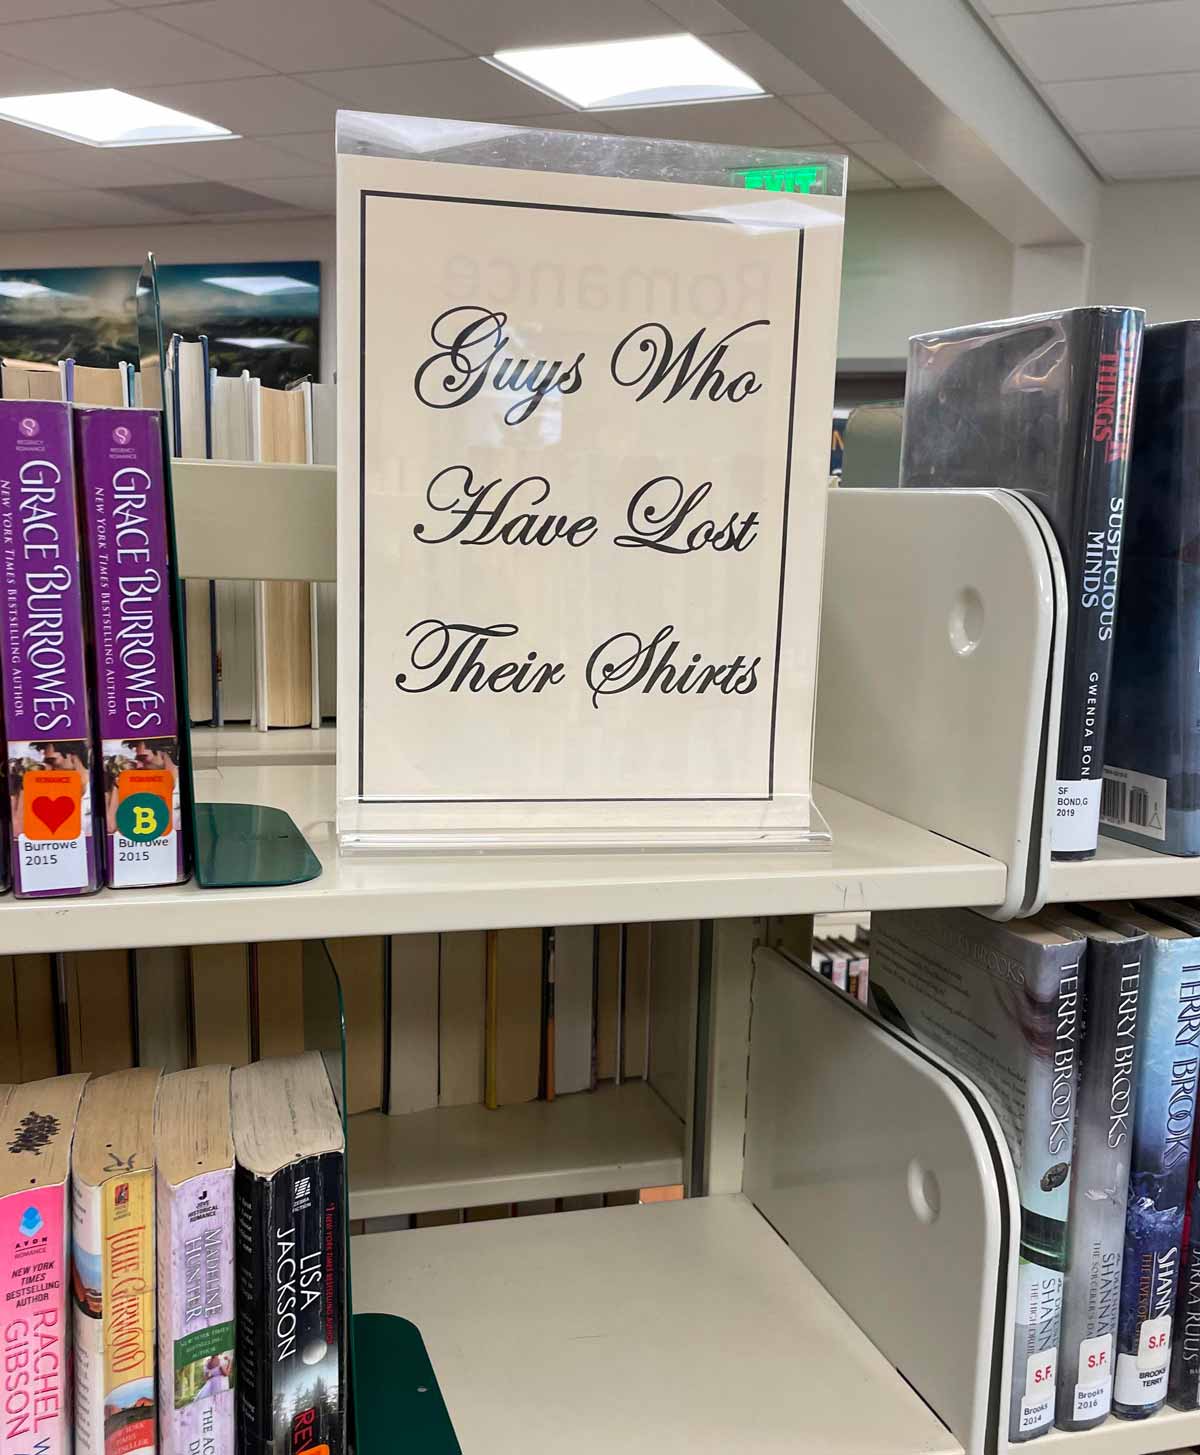 How my local library identifies the Romance Section